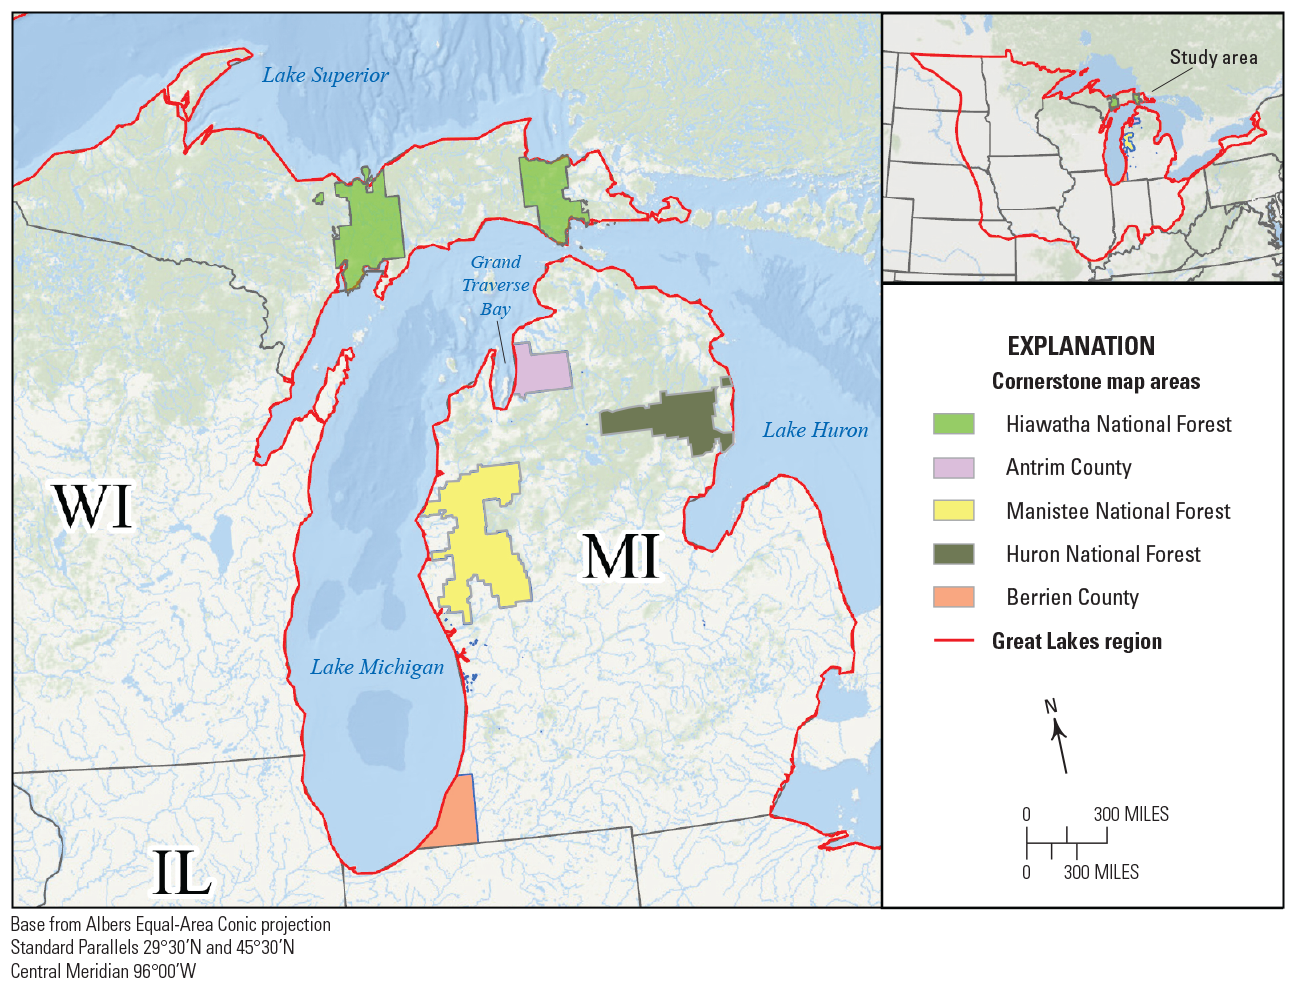 Map with colors for potential cornerstone map areas in Hiawatha, Manistree, Huron
                     National Forests; and Antrim and Berrien Counties